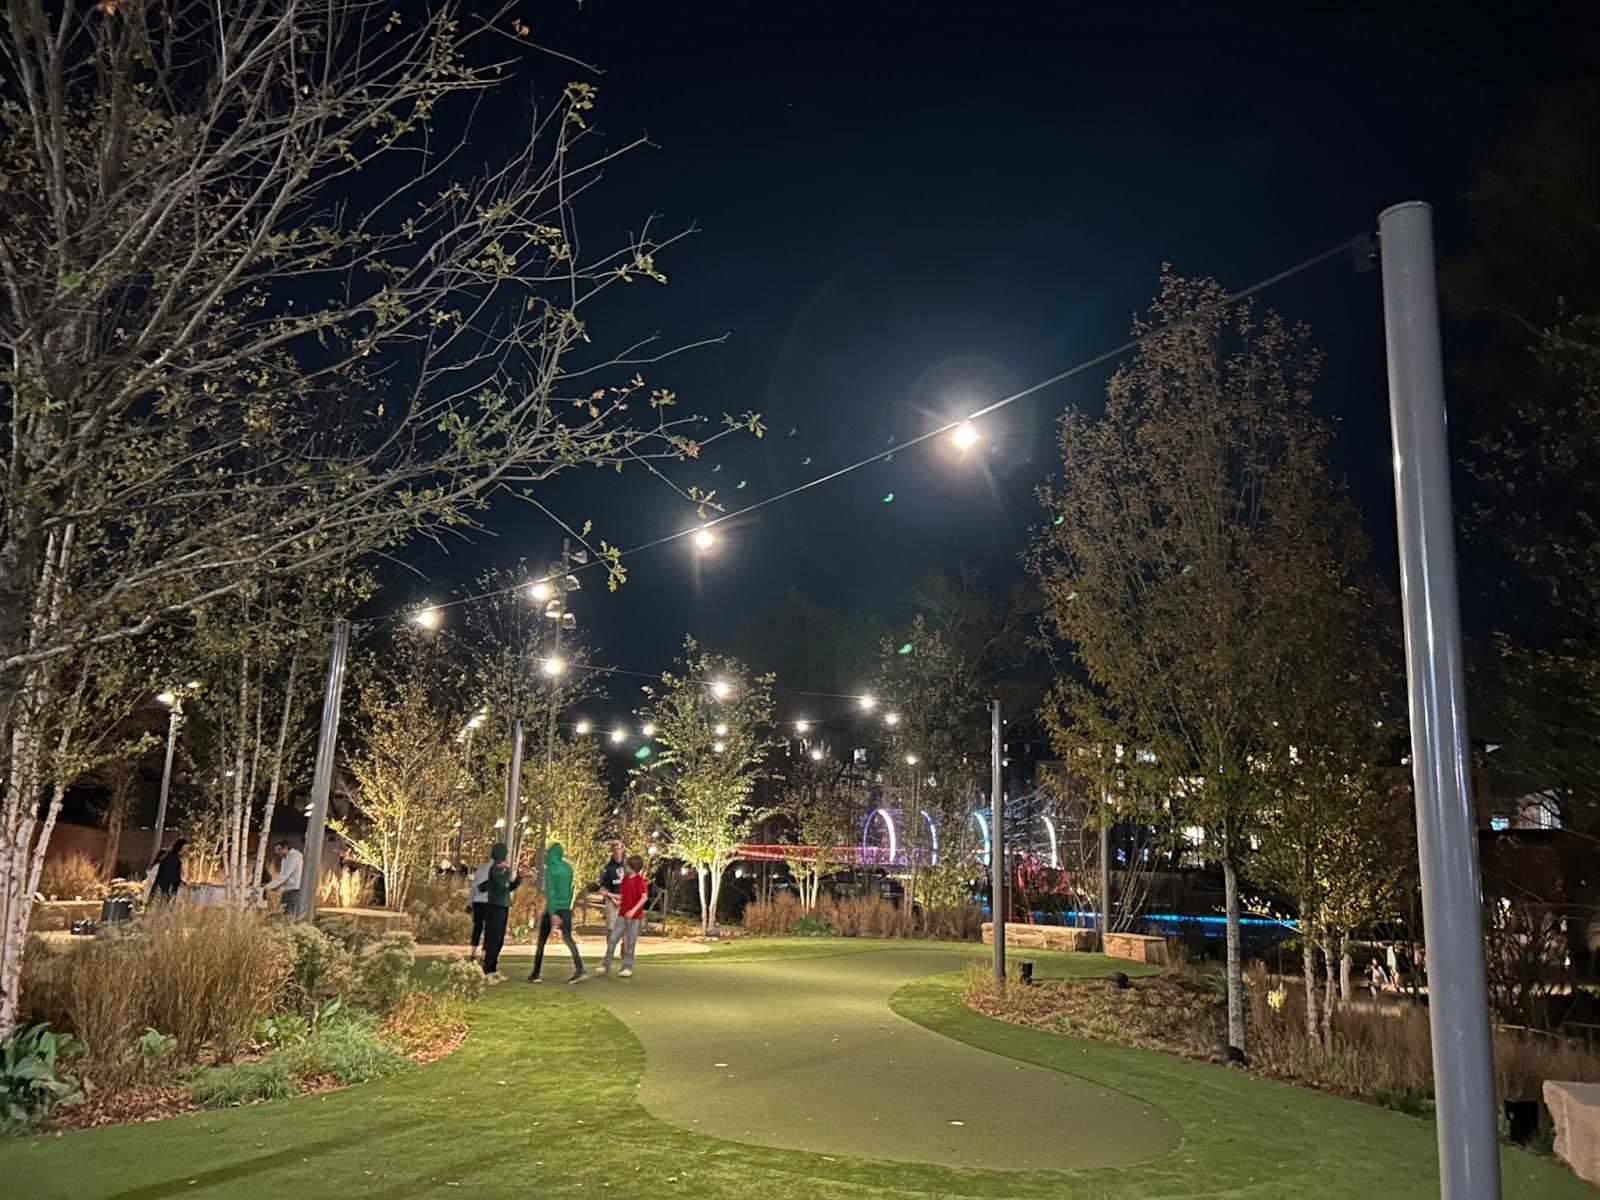 An example of a fun use of the park that brings the community together. Here is a set up Putt Putt course for people to enjoy. At night the string lights come on and different led colored lights on features of the park.